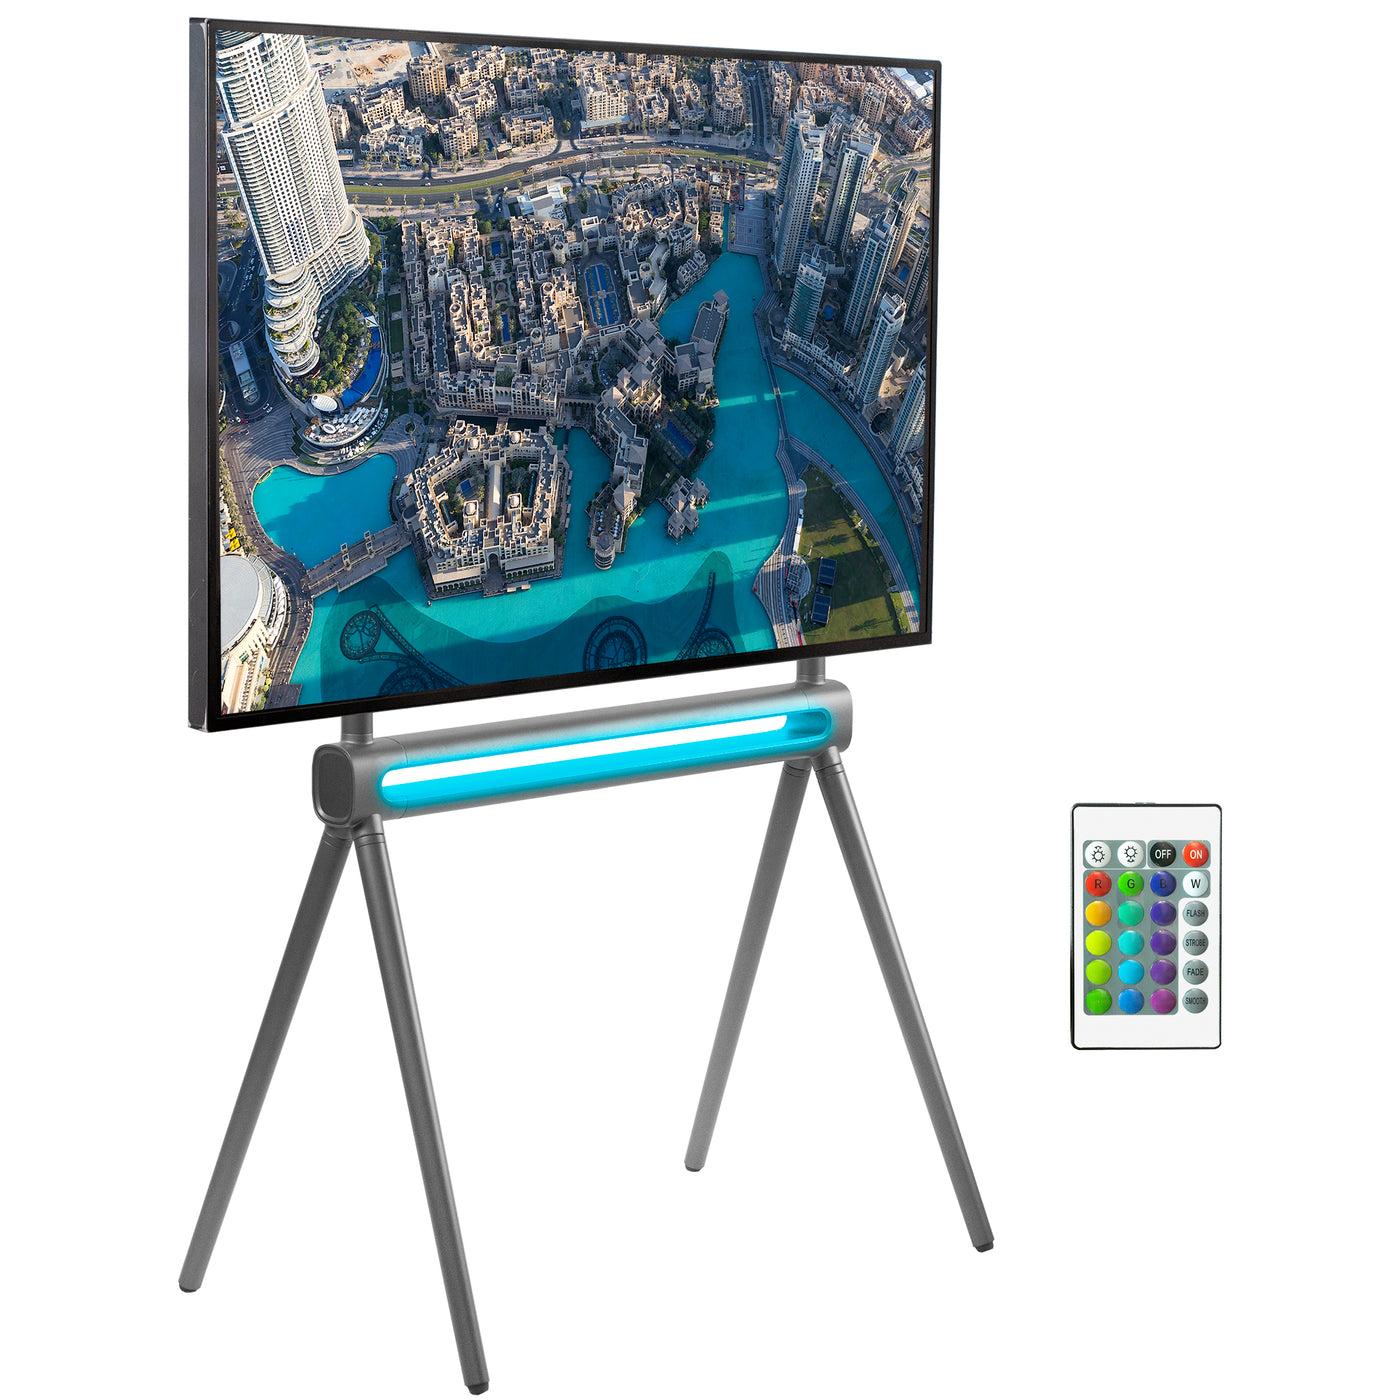 Sturdy easel studio TV stand with remote control RGB lighting.